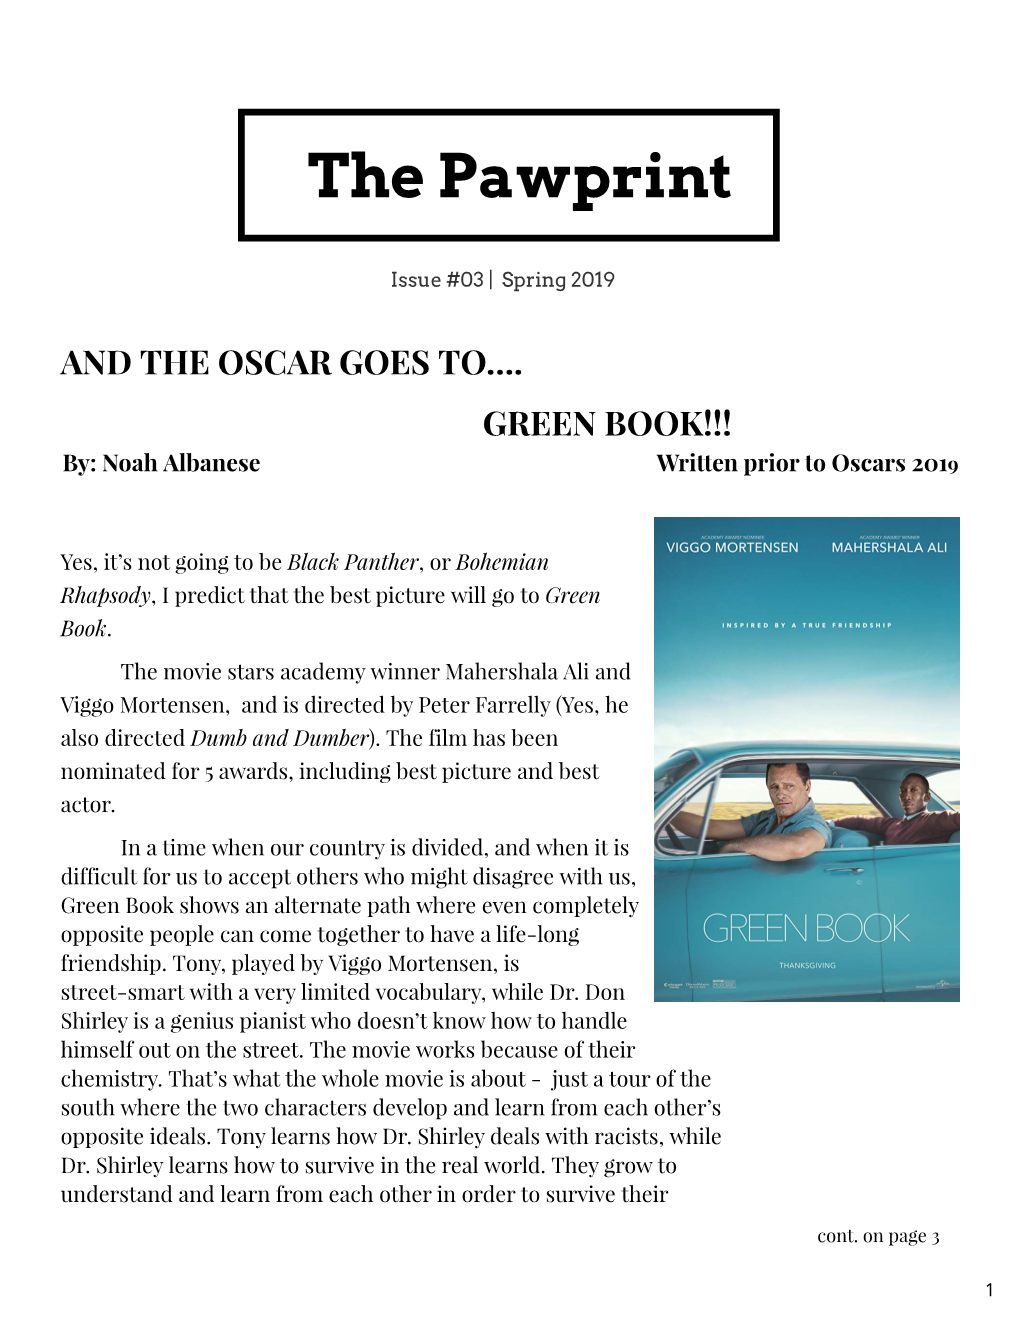 Pawprint Student Newspaper Available